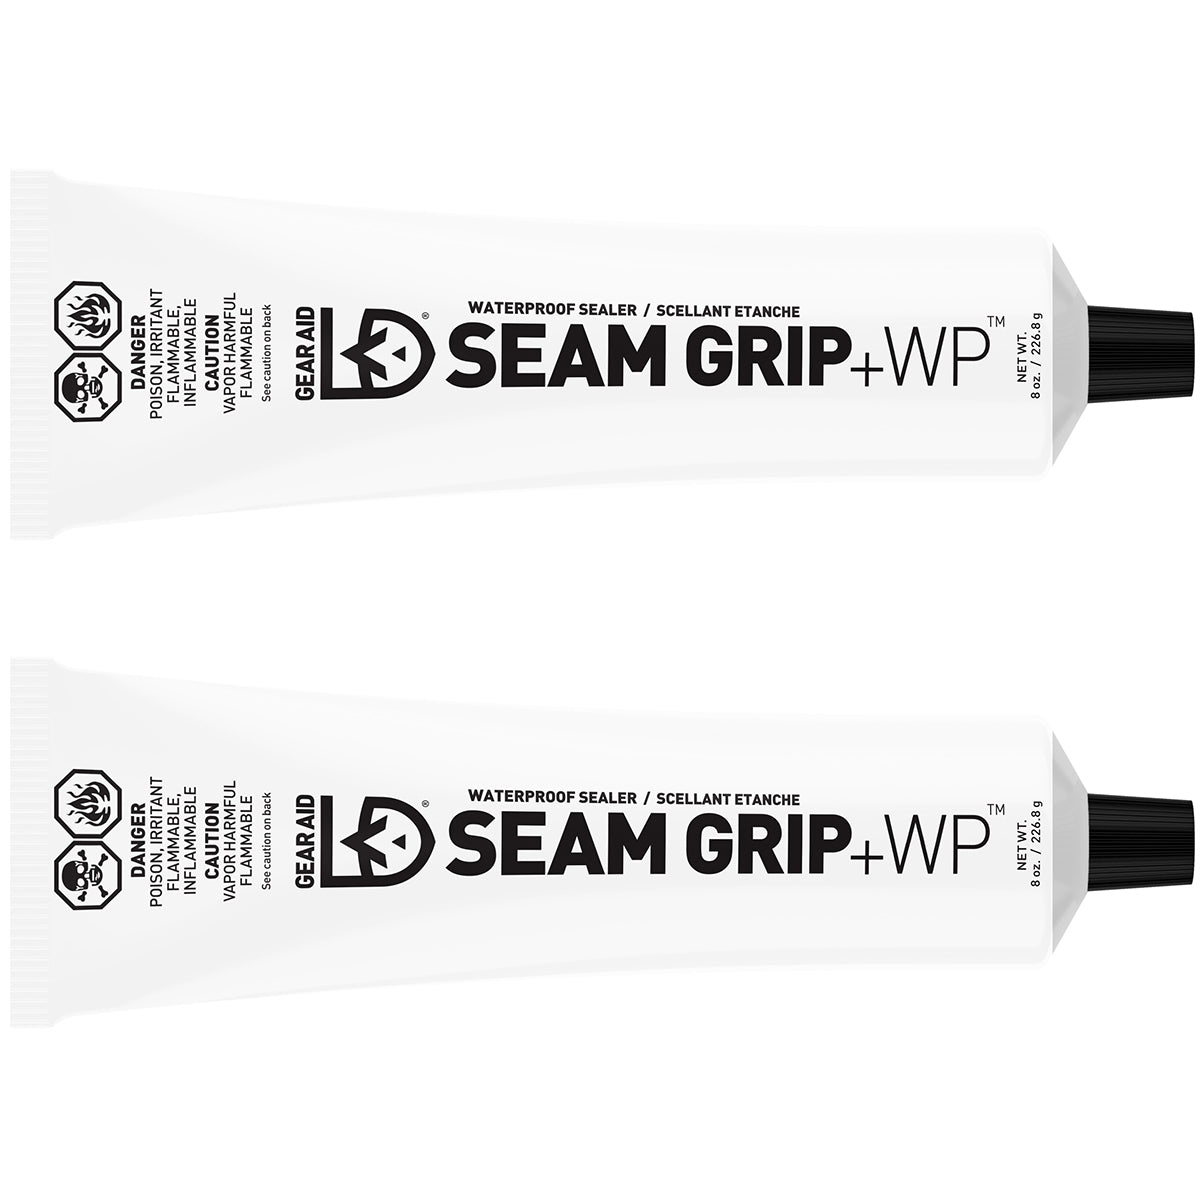 Gear Aid Seam Grip 8 oz. WP Waterproof Tent Sealant and Adhesive - 2-Pack Gear Aid